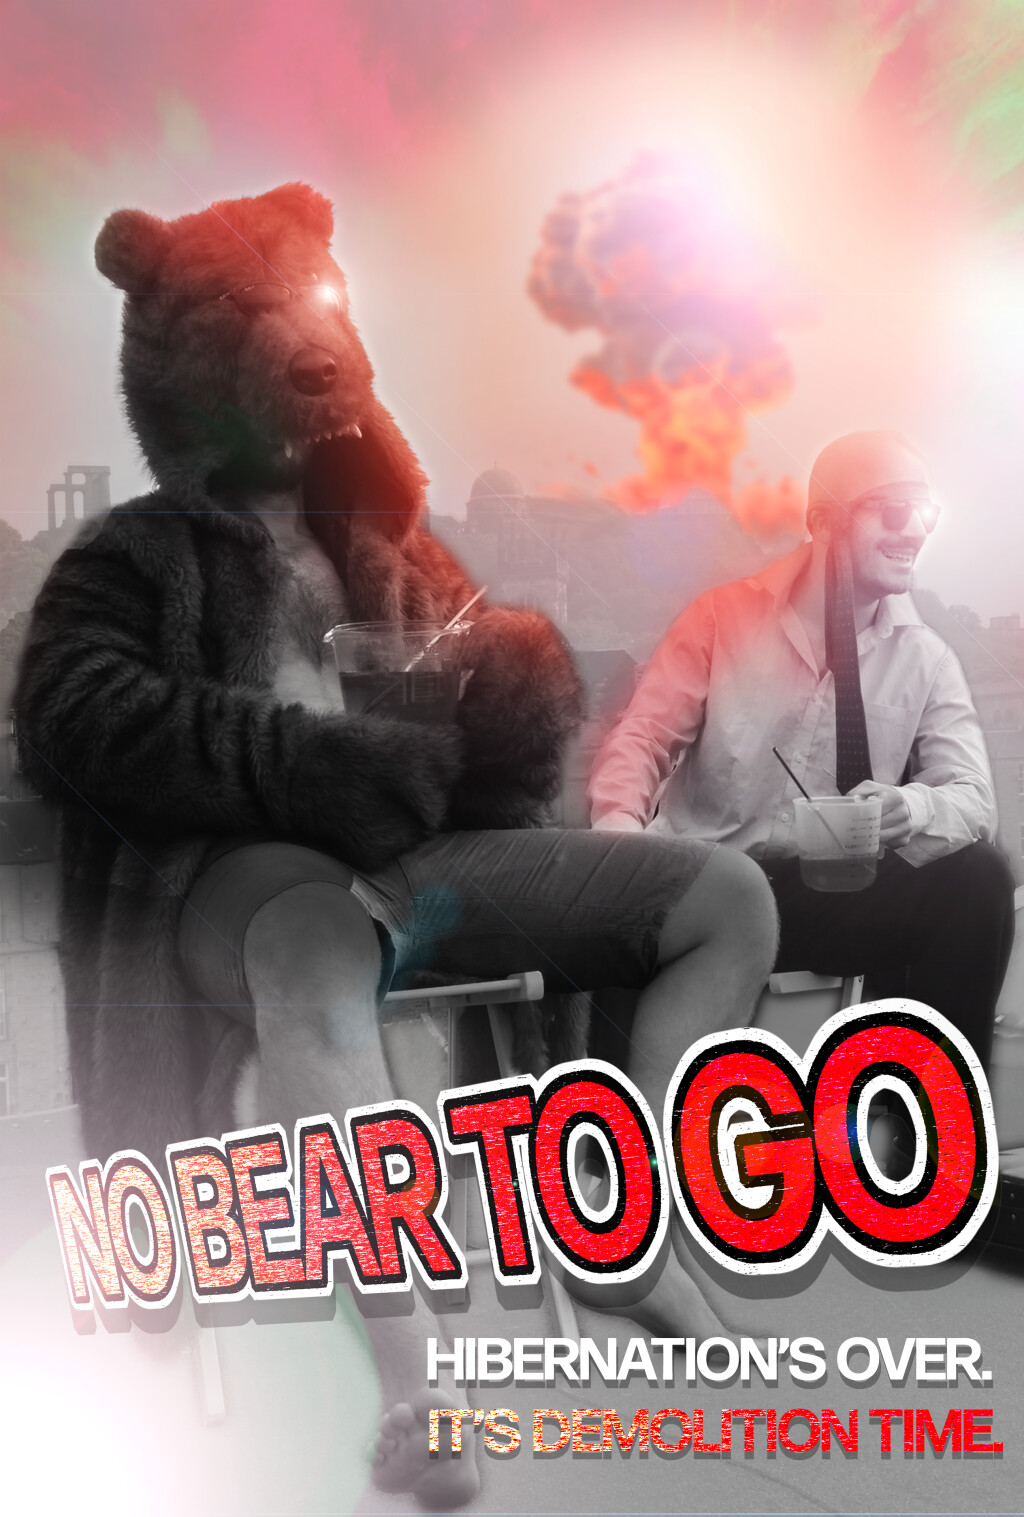 Filmposter for No Bear To Go